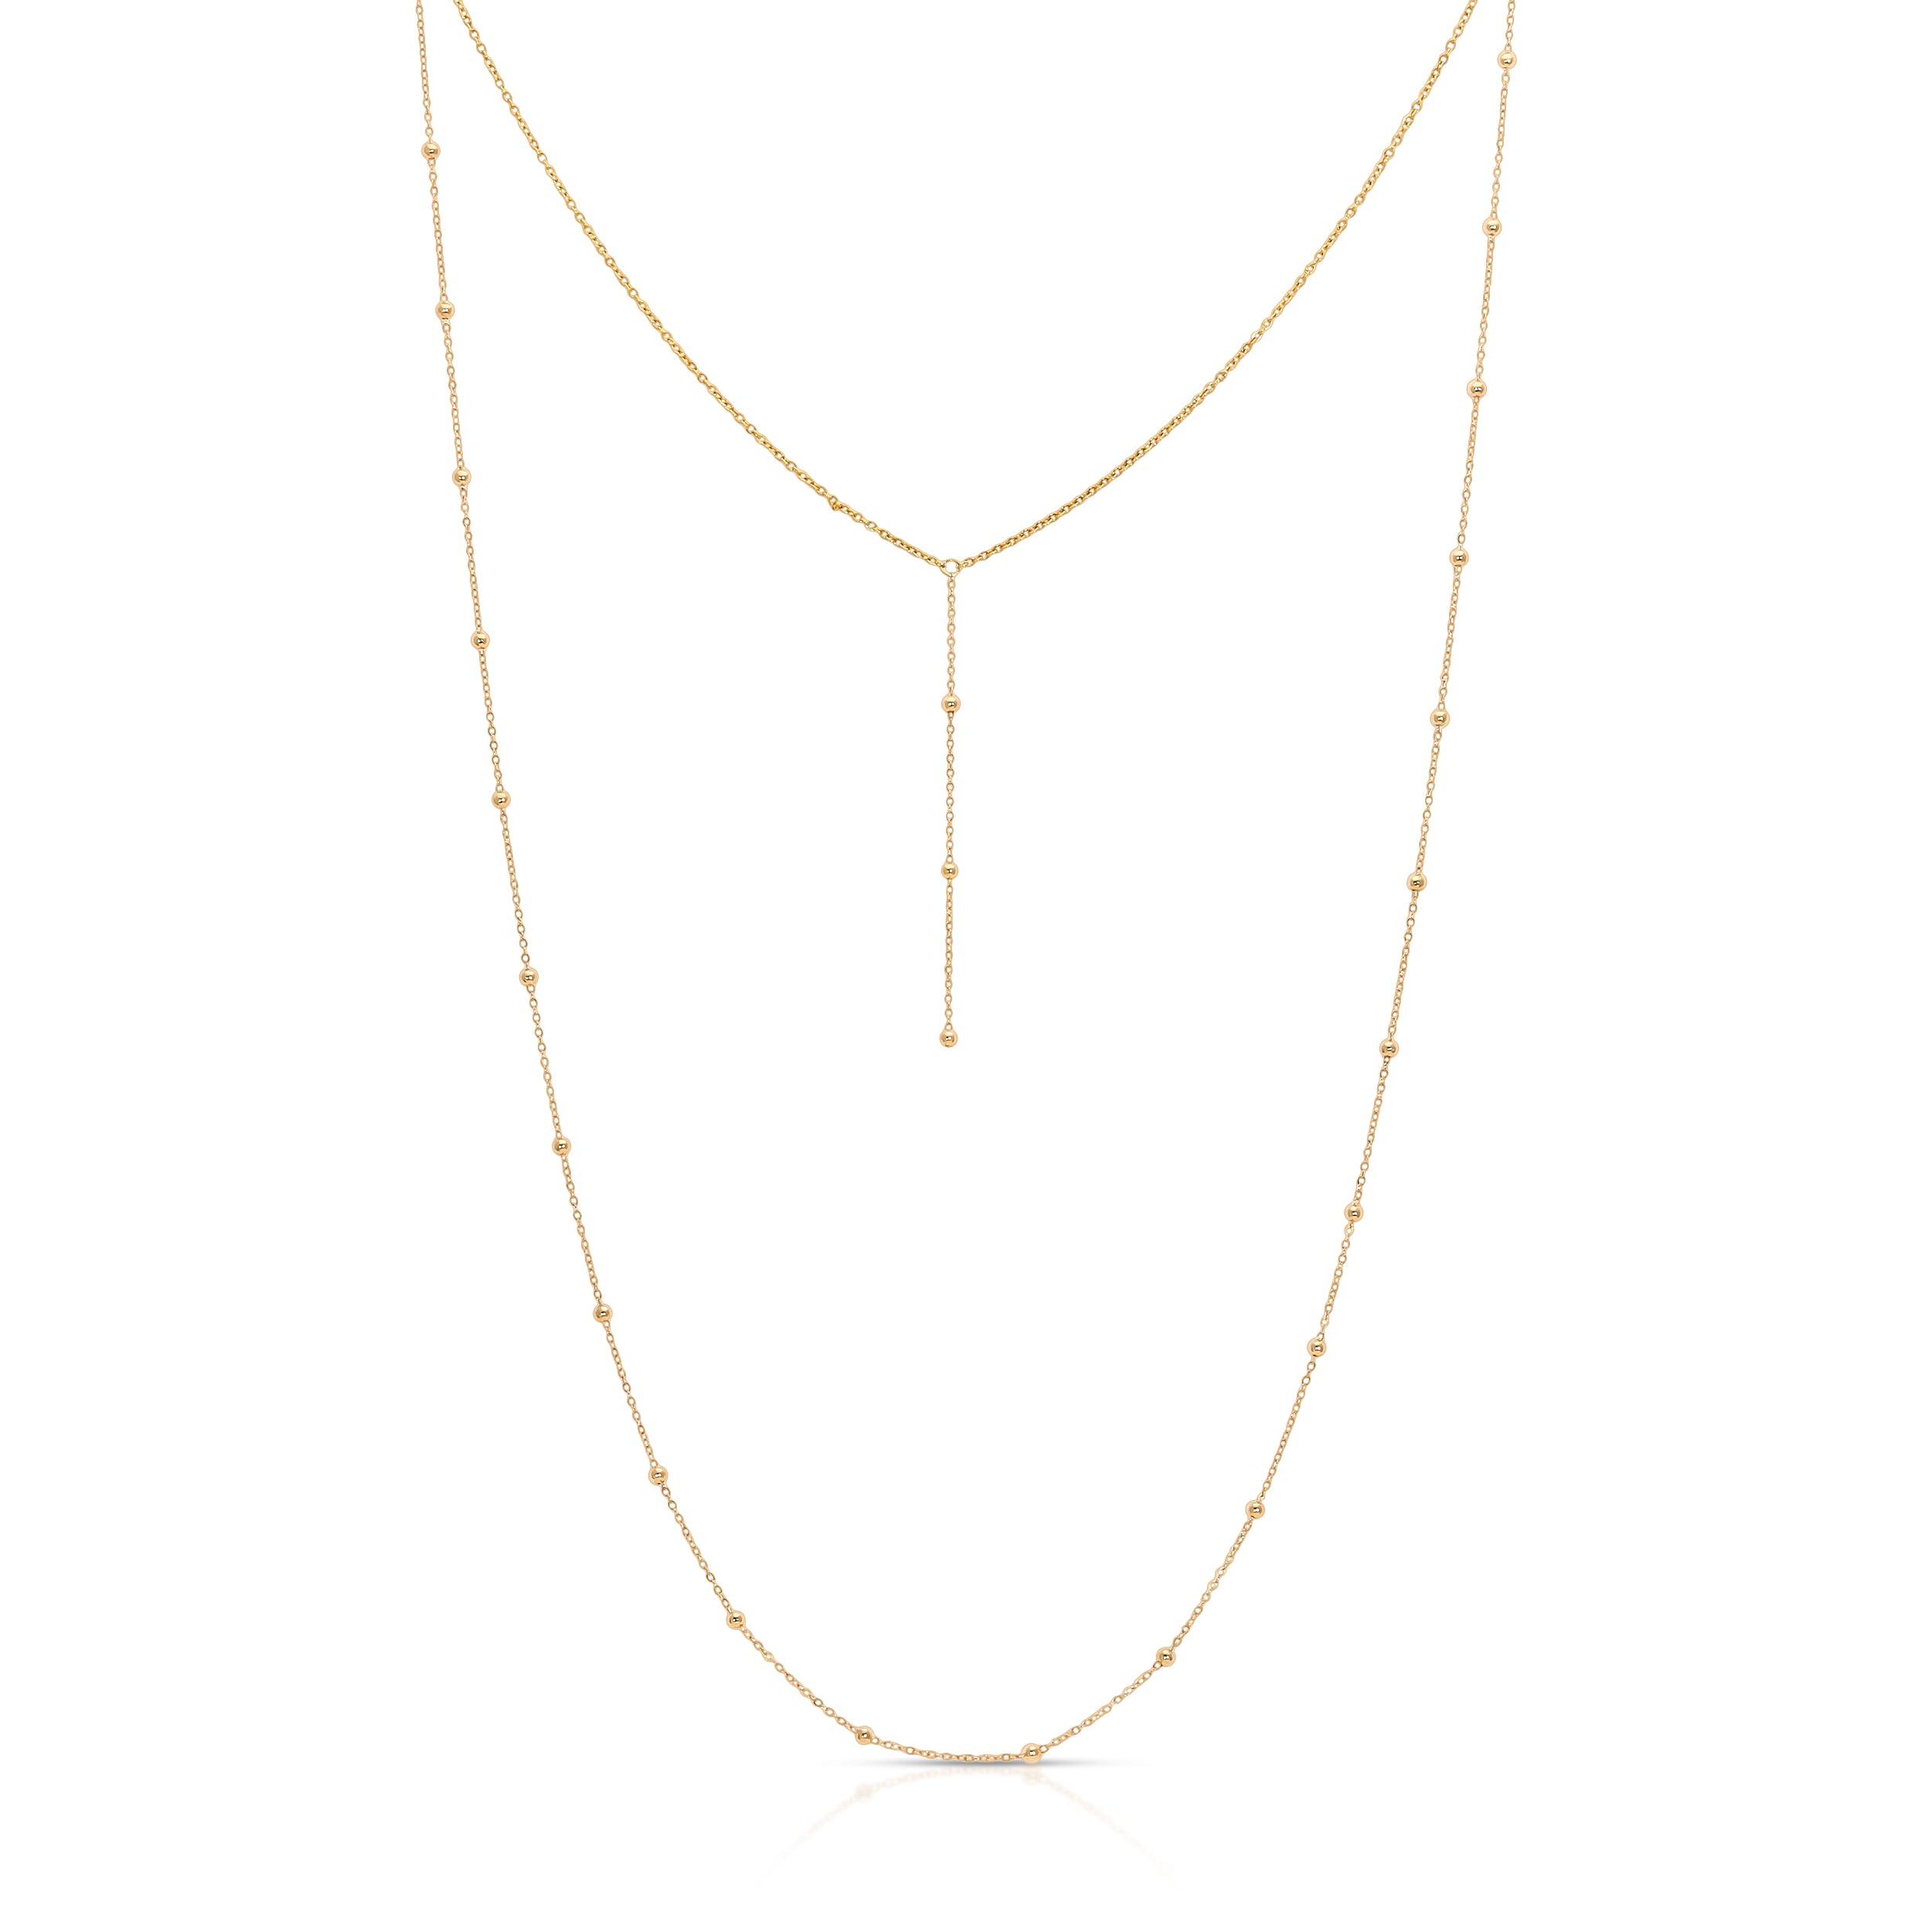 Chain Reaction Timeless Necklace  | Chain Necklace Women | Chain Reaction Necklace - JaJaara